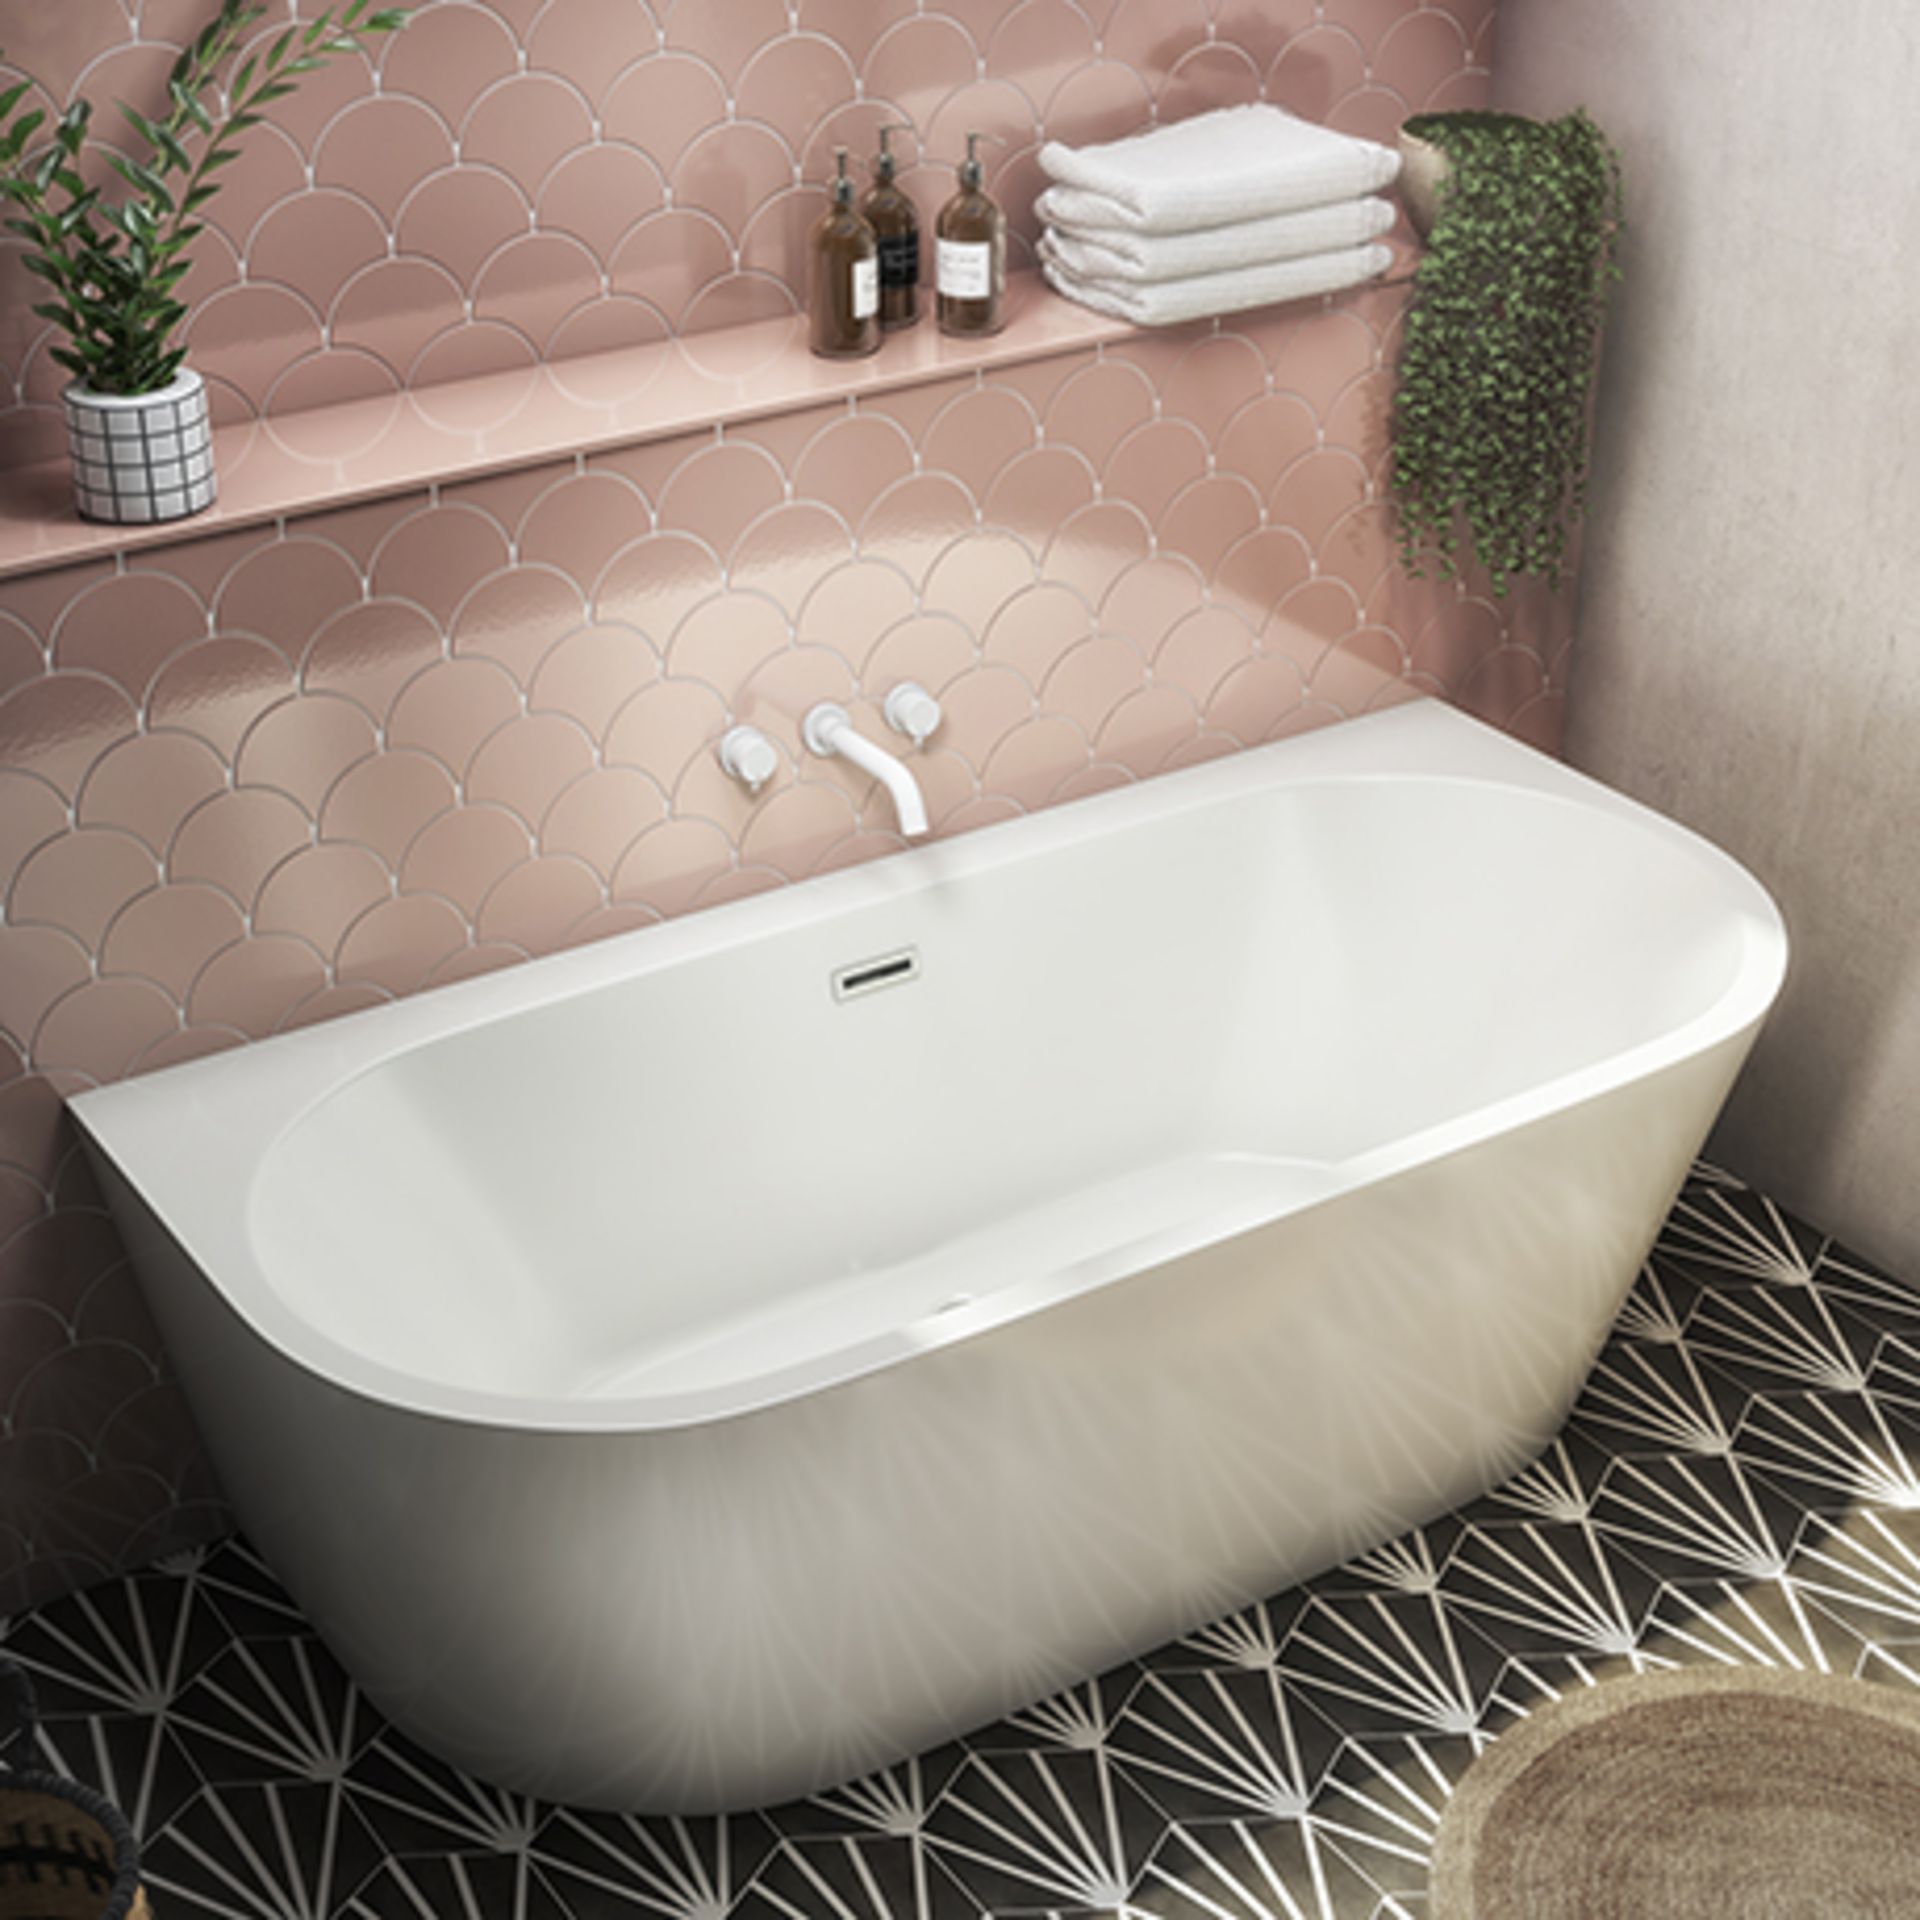 NEW (Z50) 1800x850mm Curved D Shape Bath. RRP £660.00. This bath is also double ended, this means